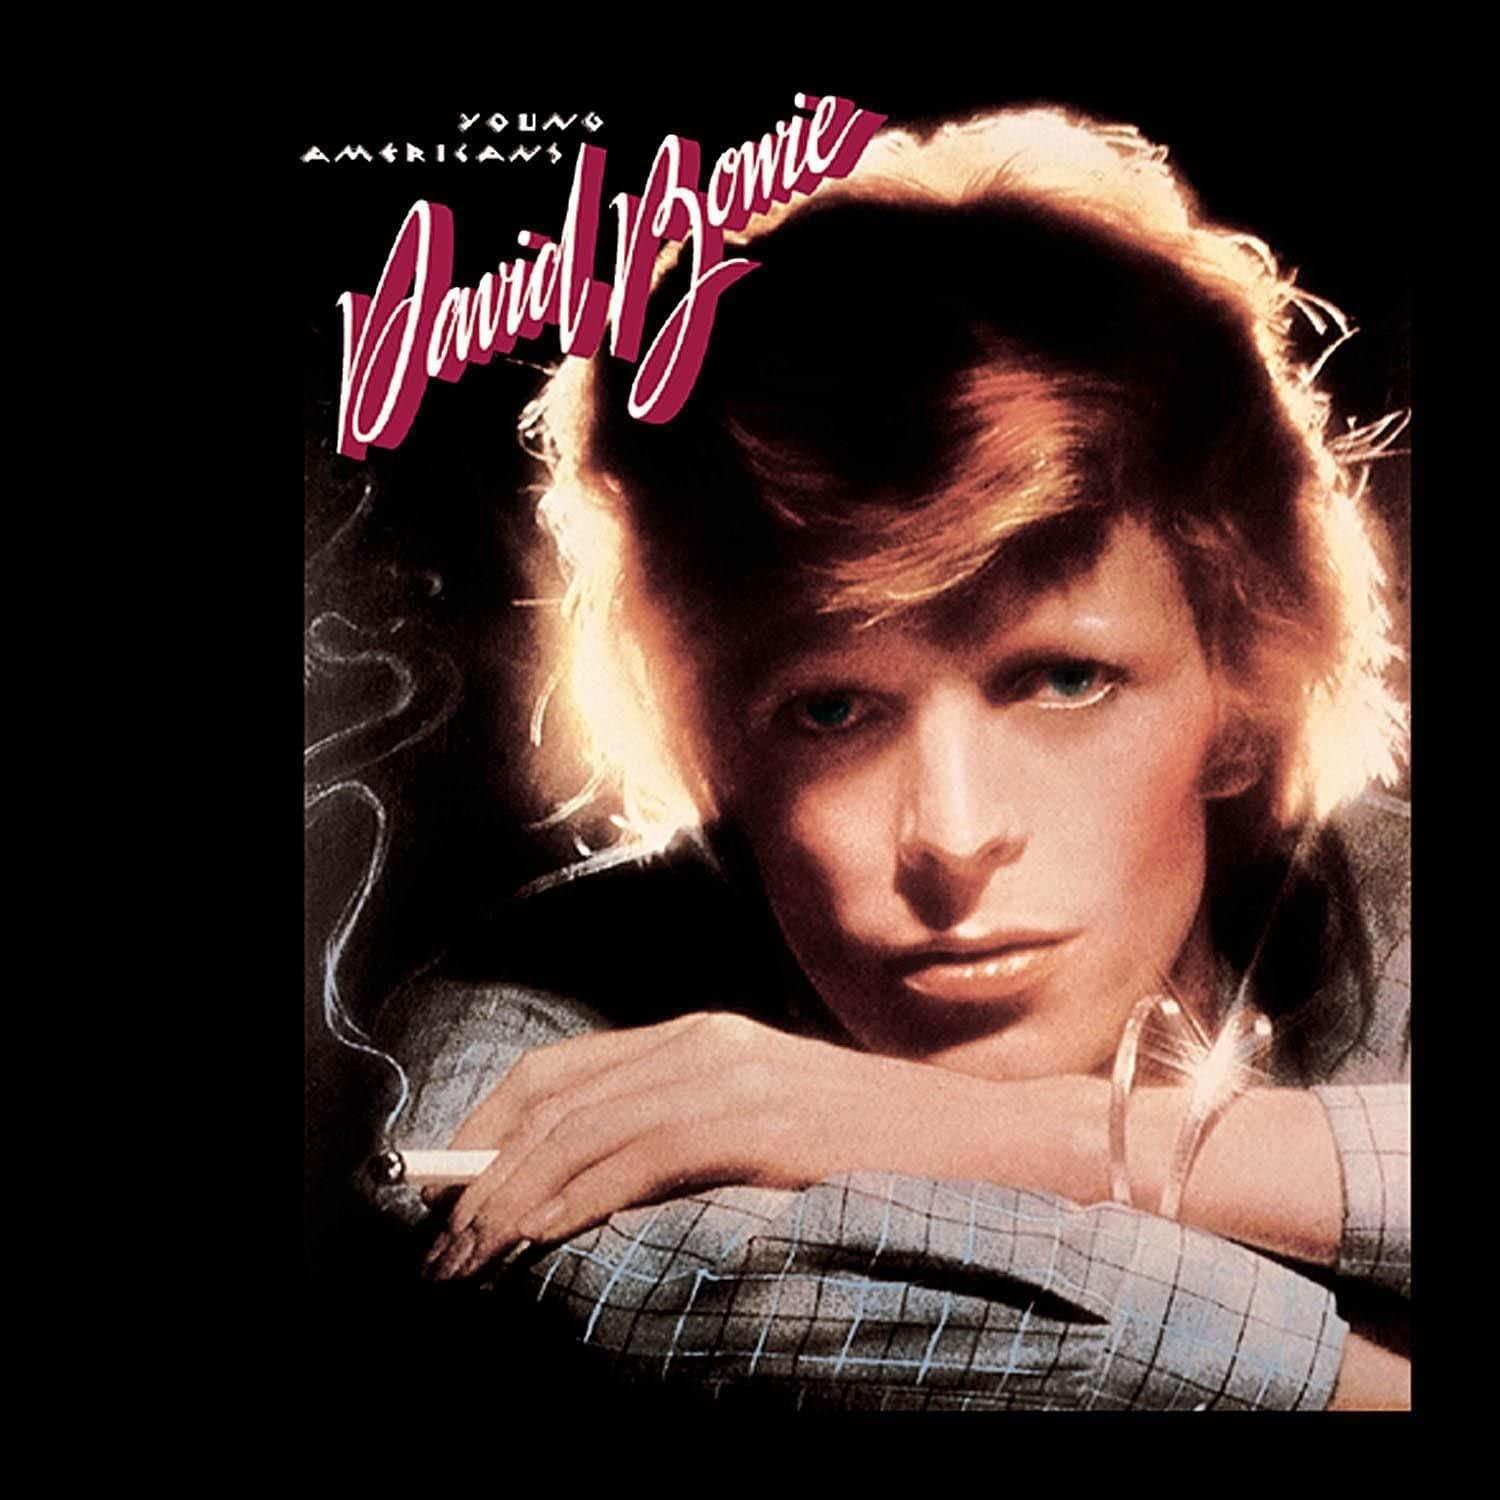 David Bowie - Young Americans (1975) LP